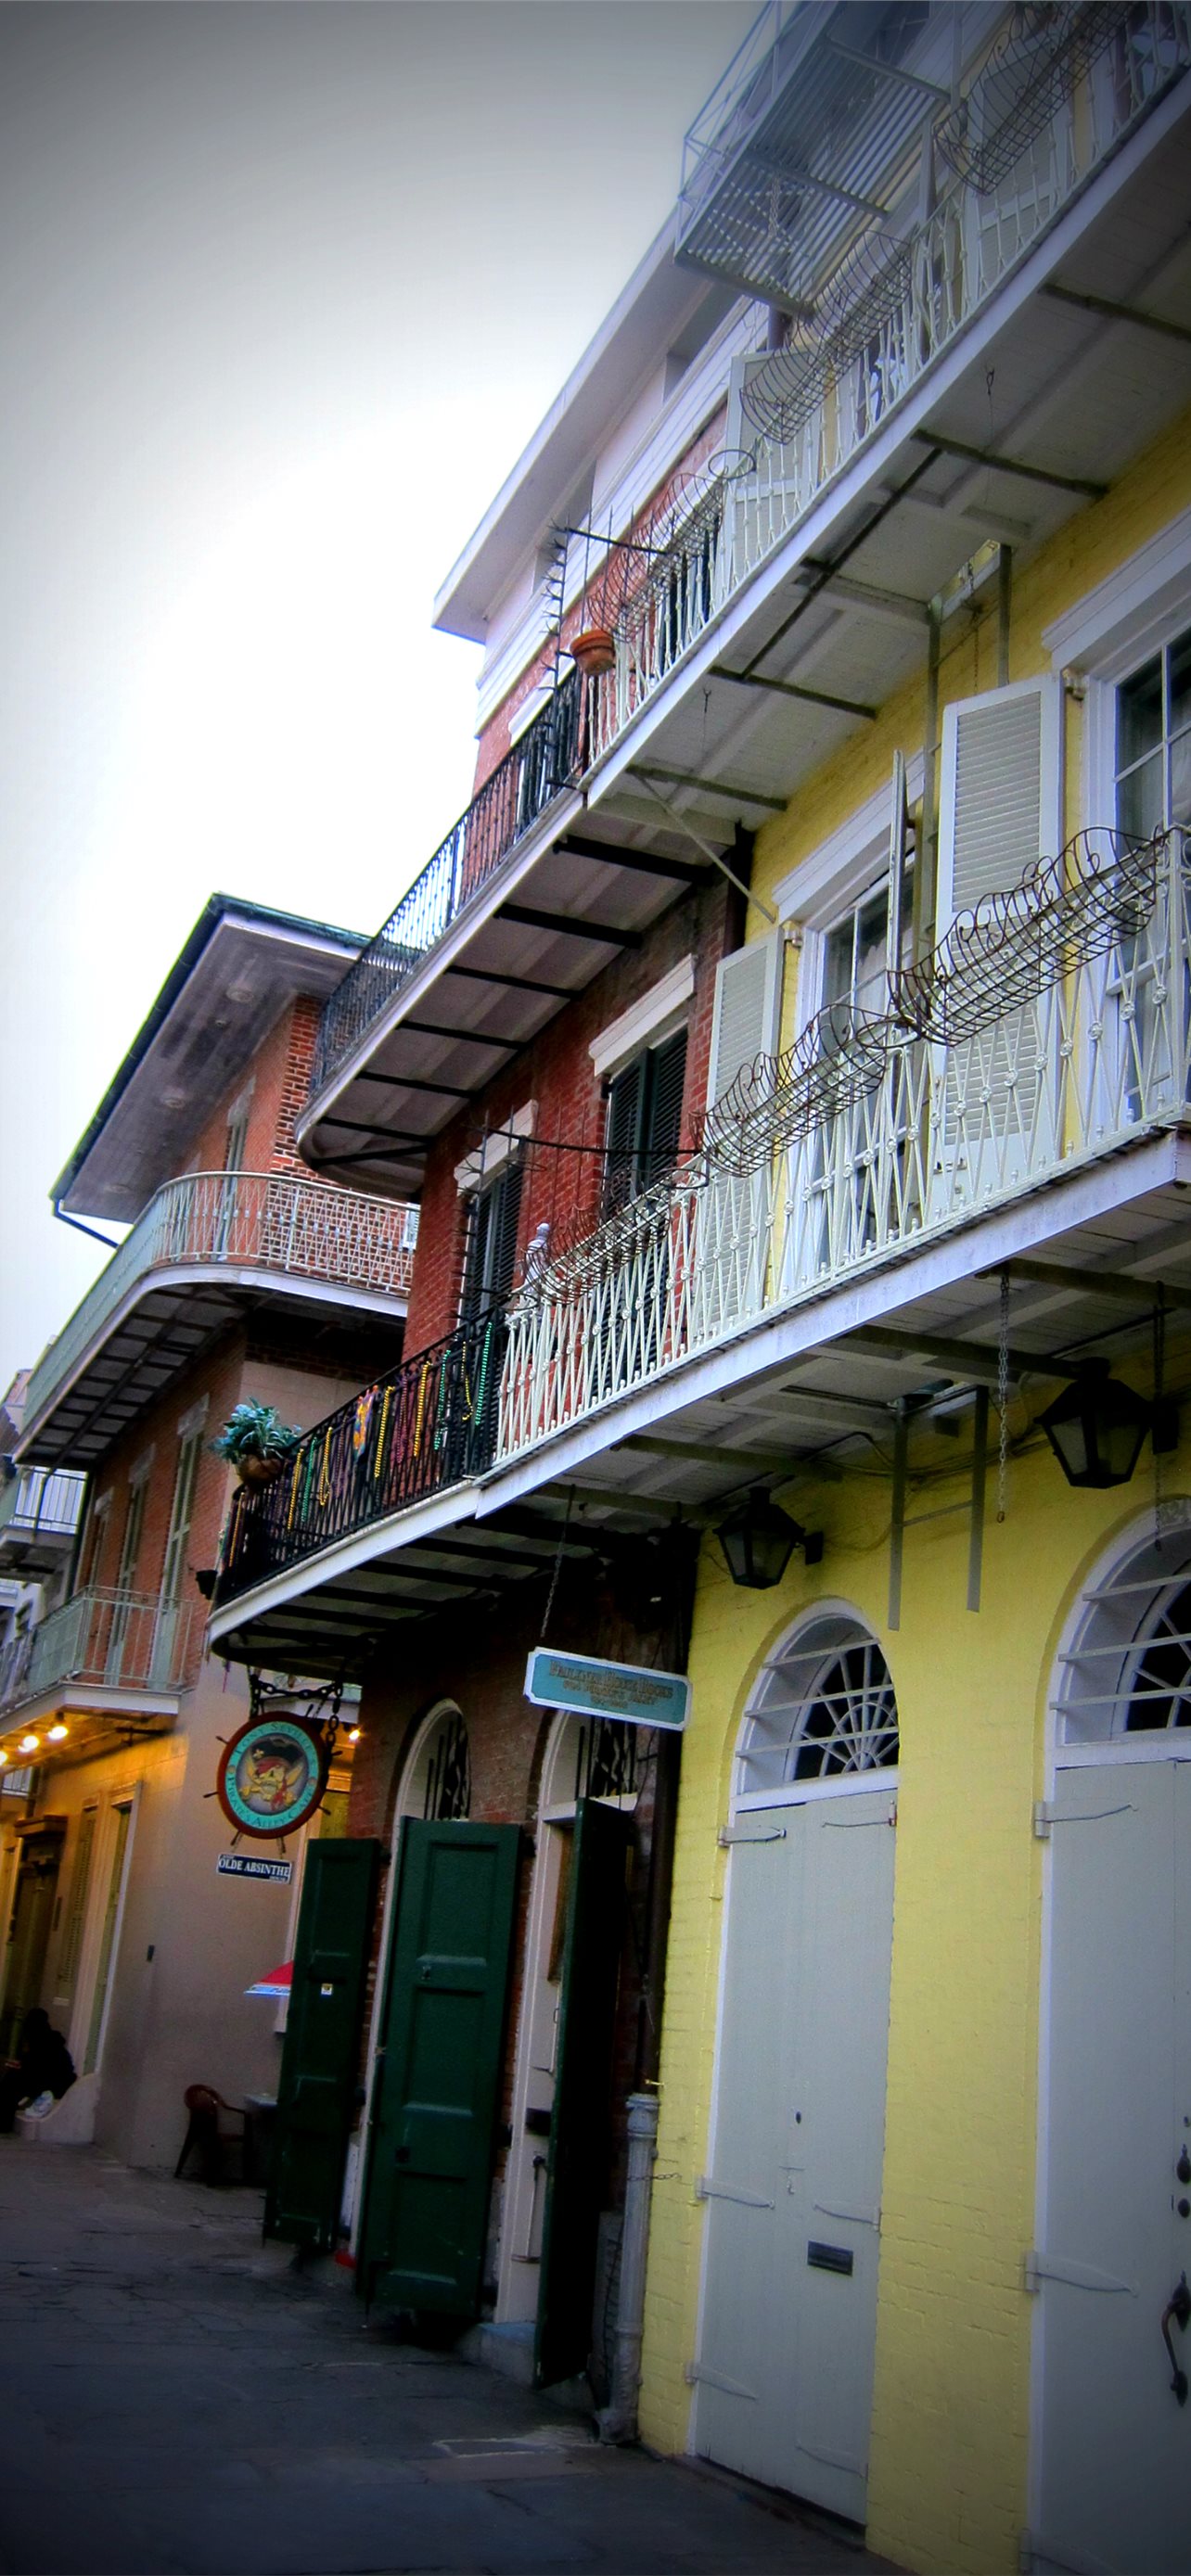 French Quarter Wallpapers